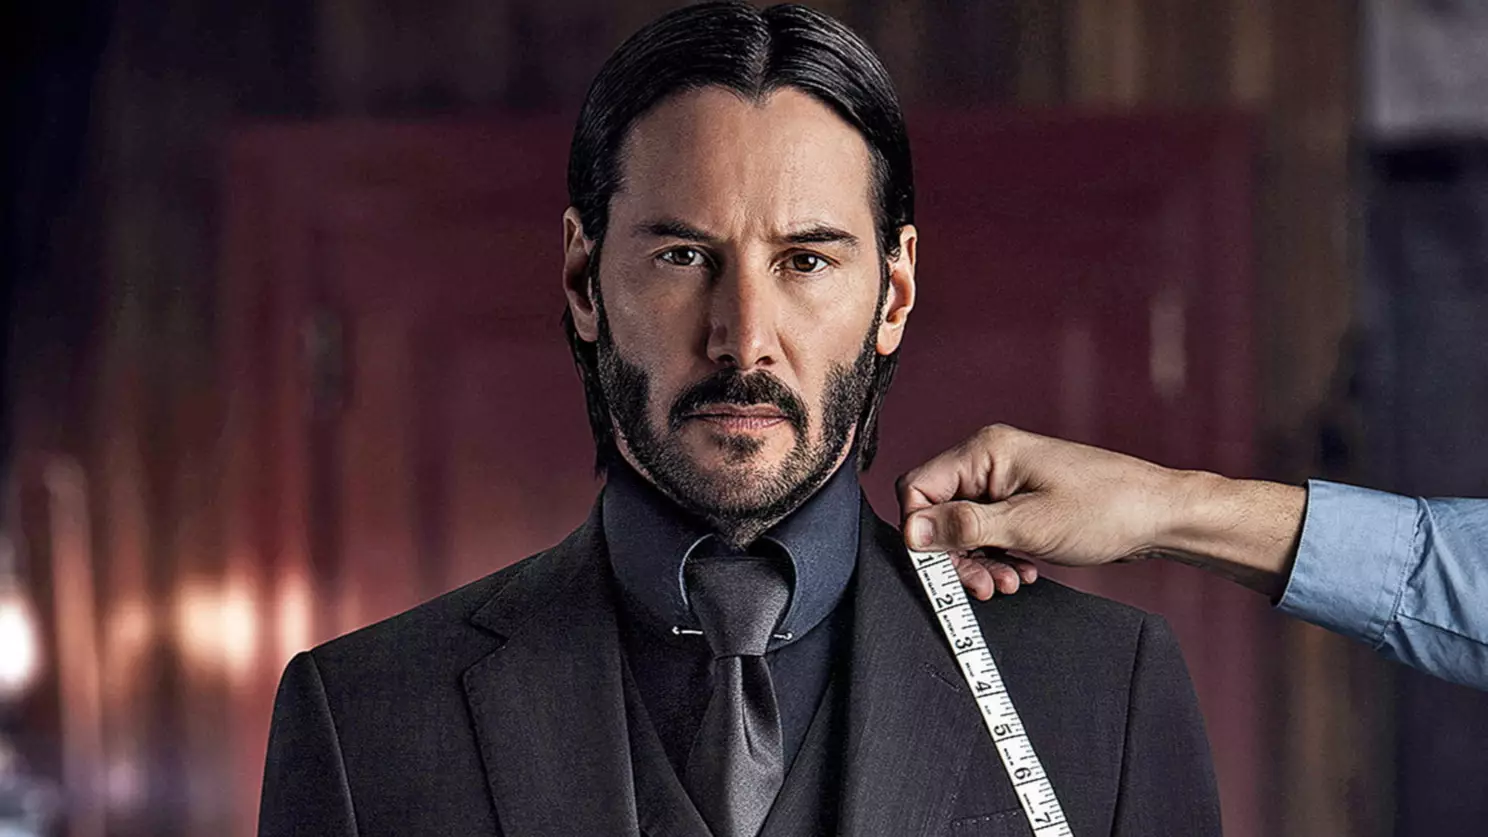 New John Wick 3 Pictures Released And Fans Can Expect 'Ninjas And A Raven'